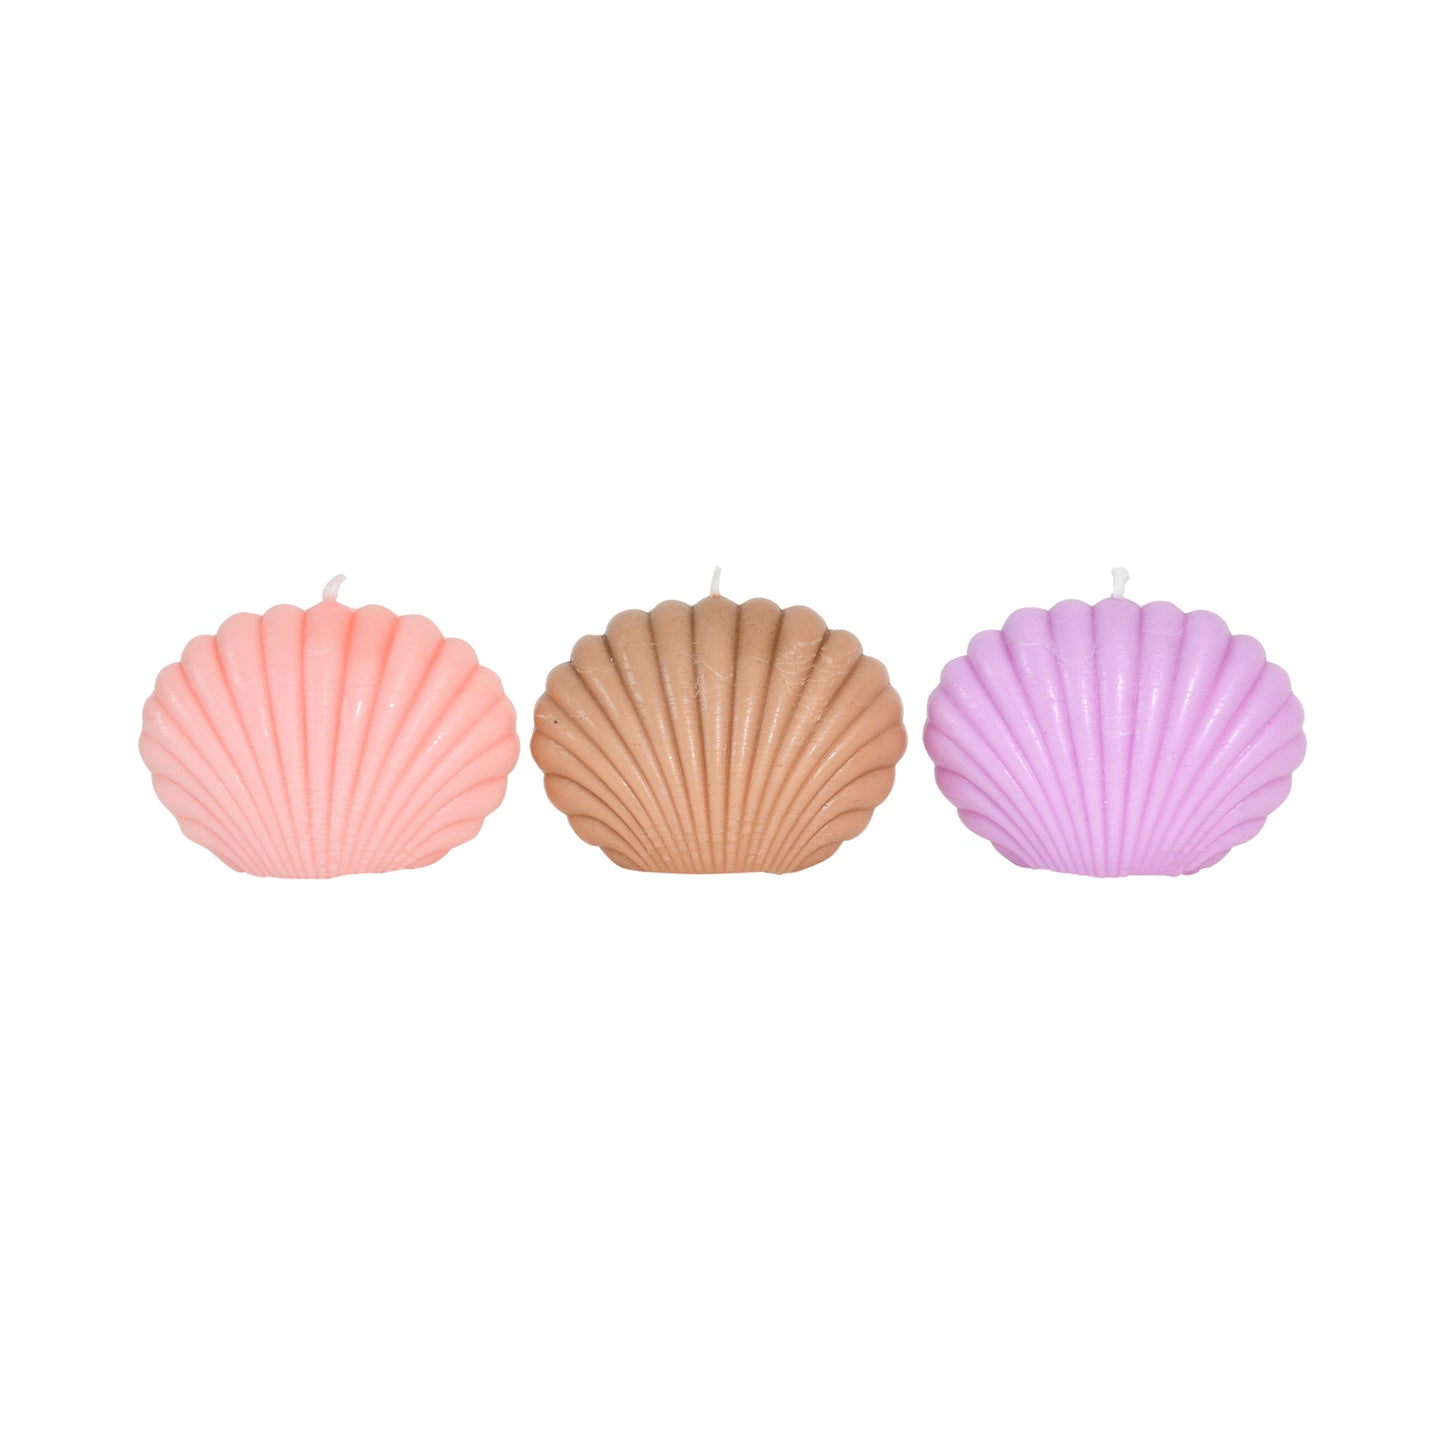 5 shell candles